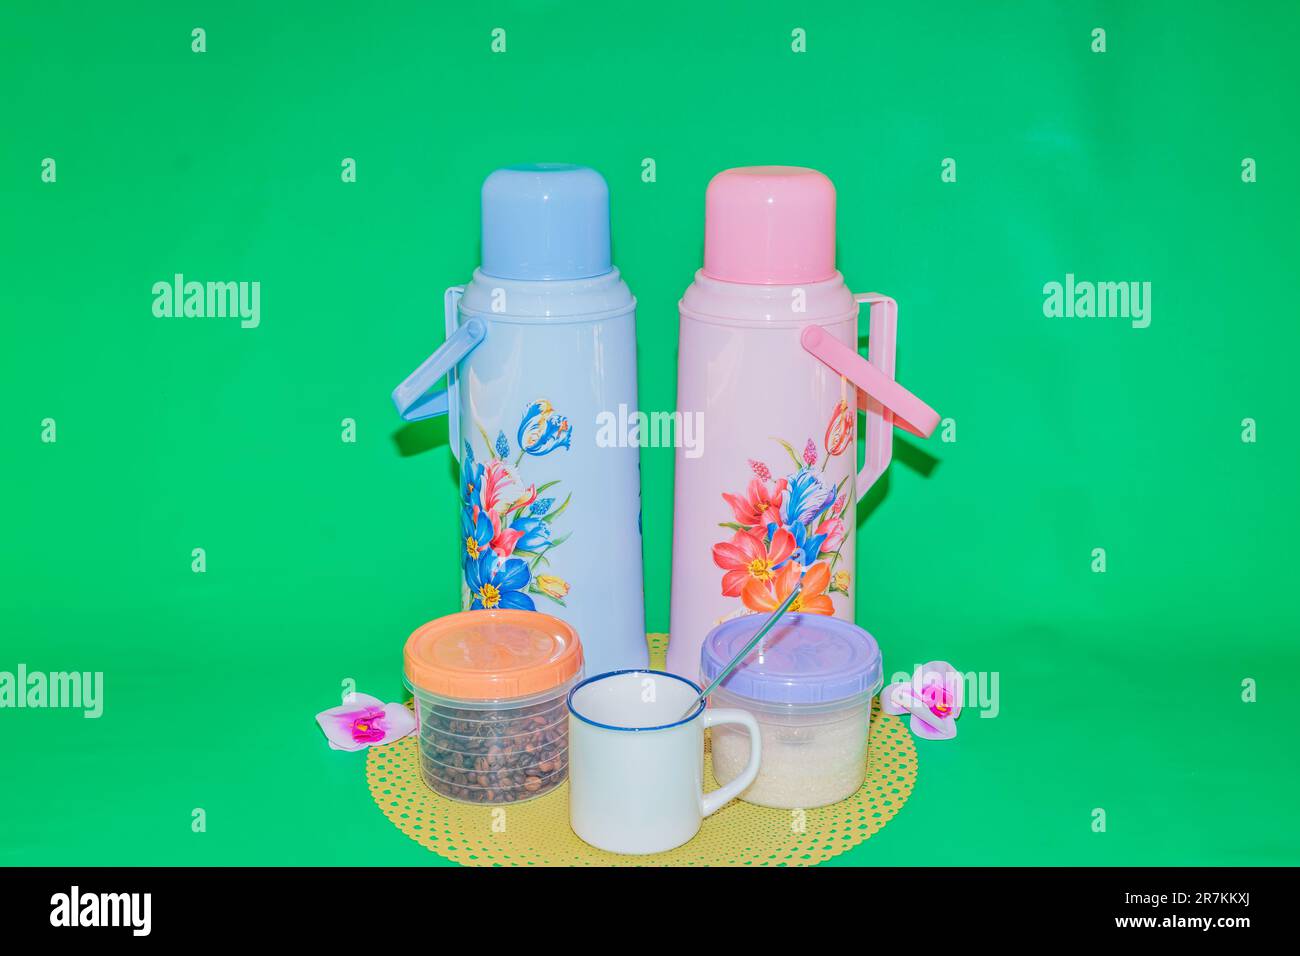 https://c8.alamy.com/comp/2R7KKXJ/the-hot-water-thermos-pink-and-blue-dual-tone-beverage-container-is-a-stylish-and-practical-accessory-for-keeping-your-drinks-hot-on-the-go-2R7KKXJ.jpg